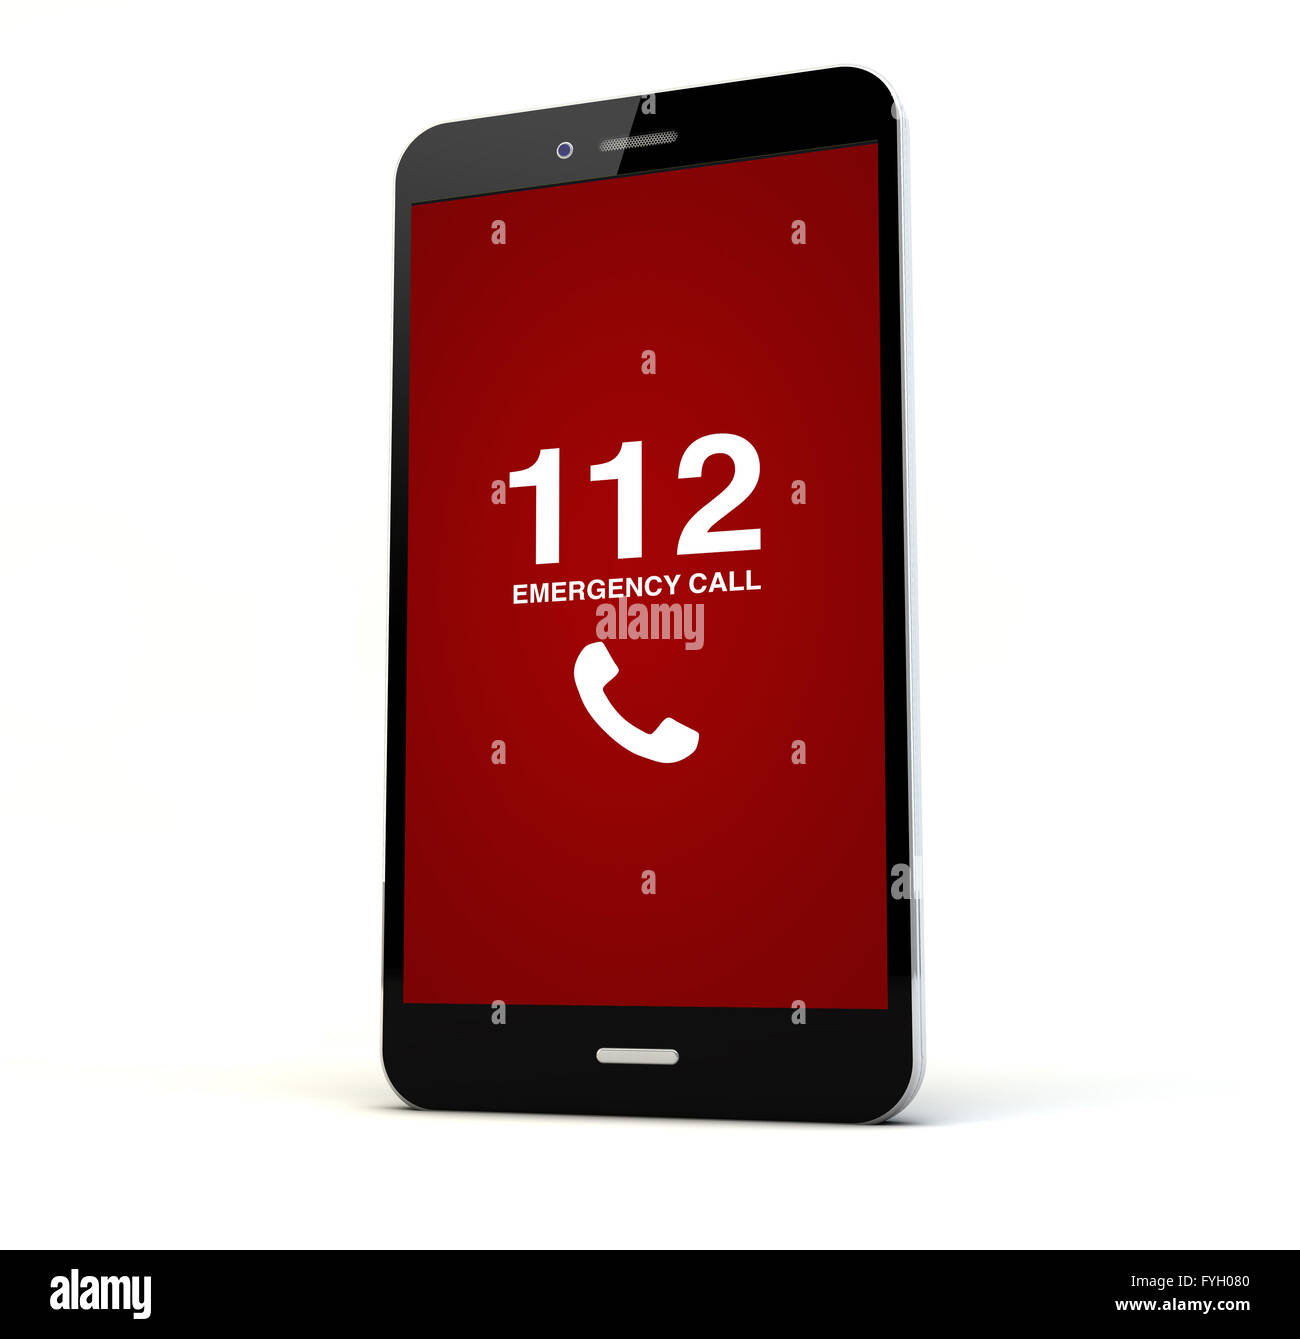 render of a phone with emergency call on the screen isolated. Screen graphics are made up. Stock Photo